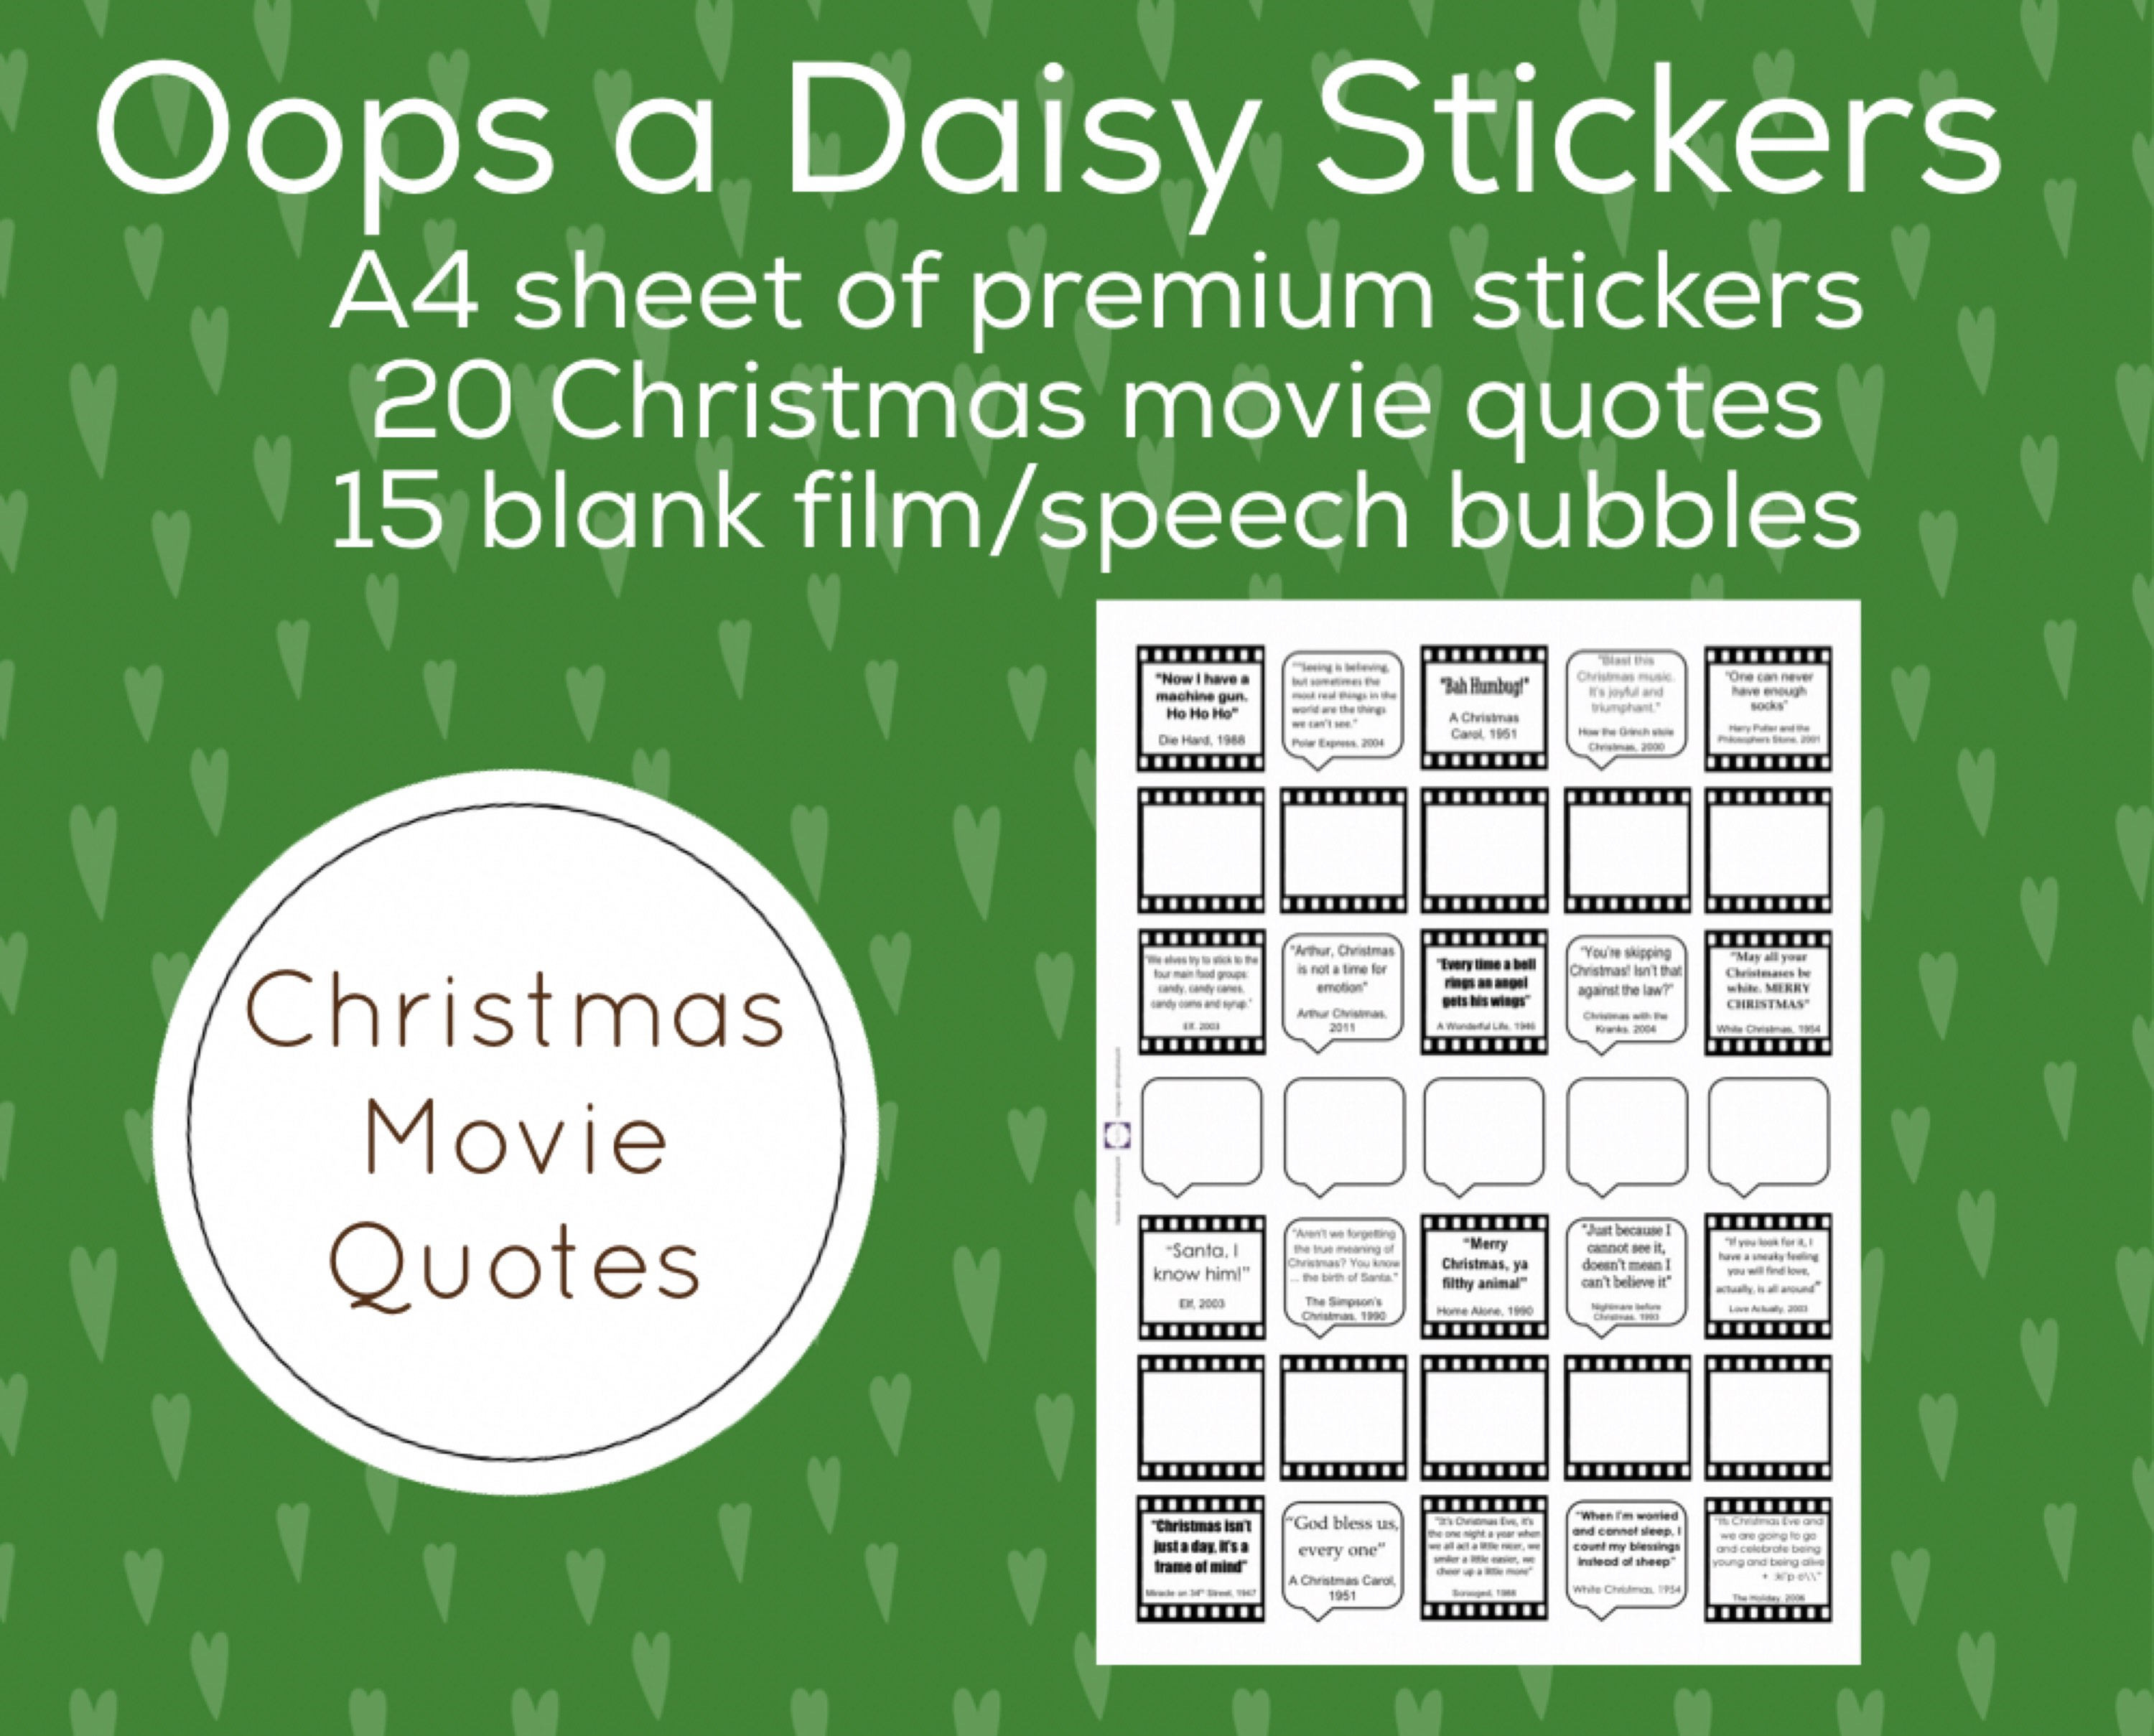 Quotes From Christmas Movies
 Oops a Daisy Christmas movie quotes stickers for